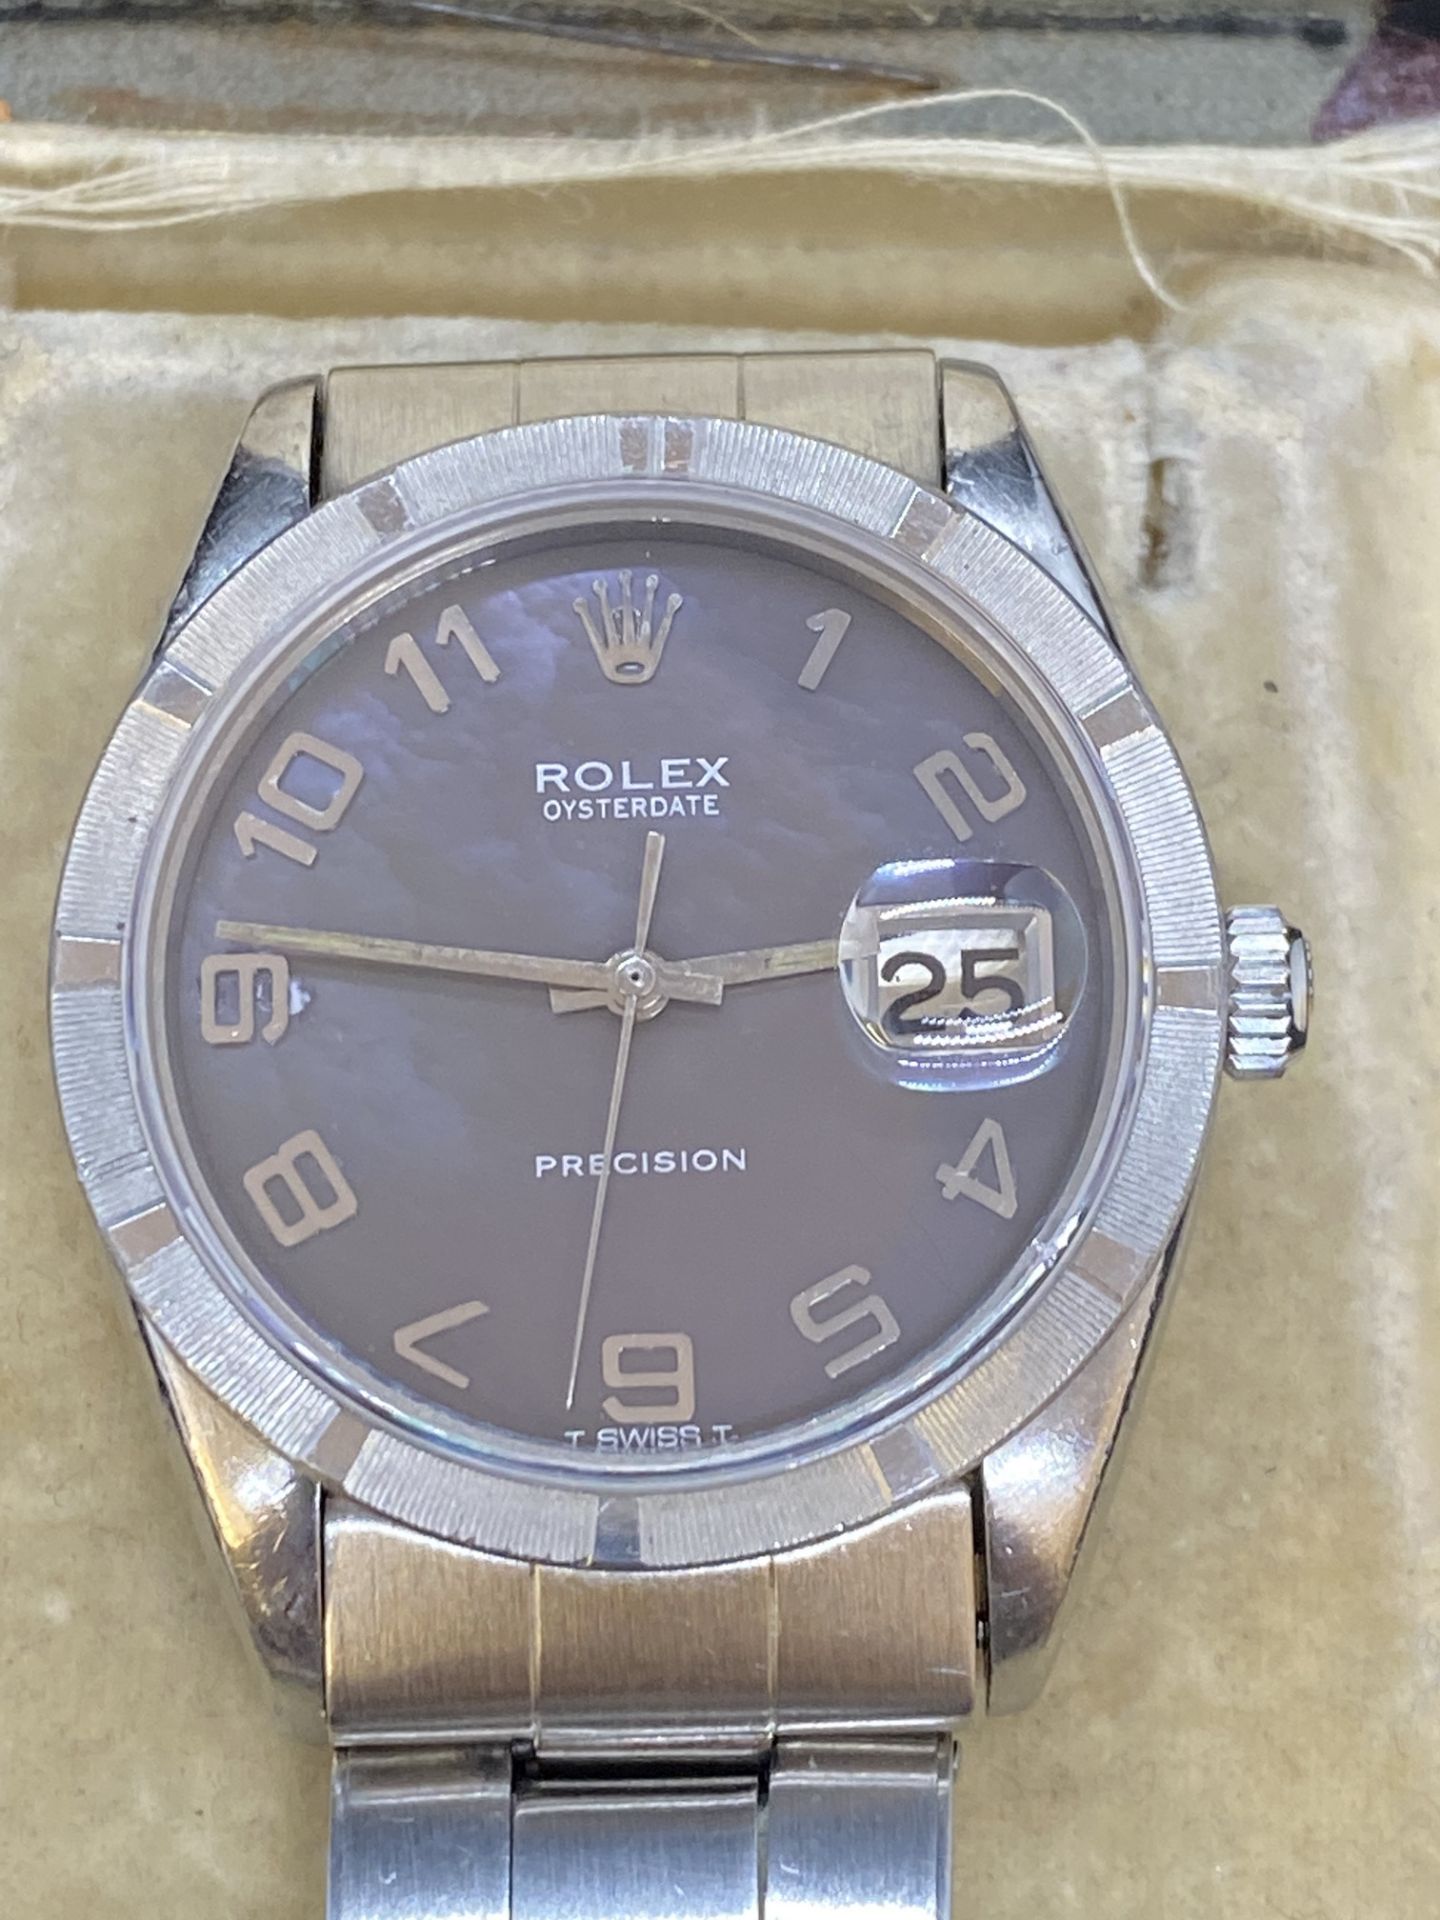 ROLEX OYSTERDATE PRECISION WATCH - Image 15 of 15